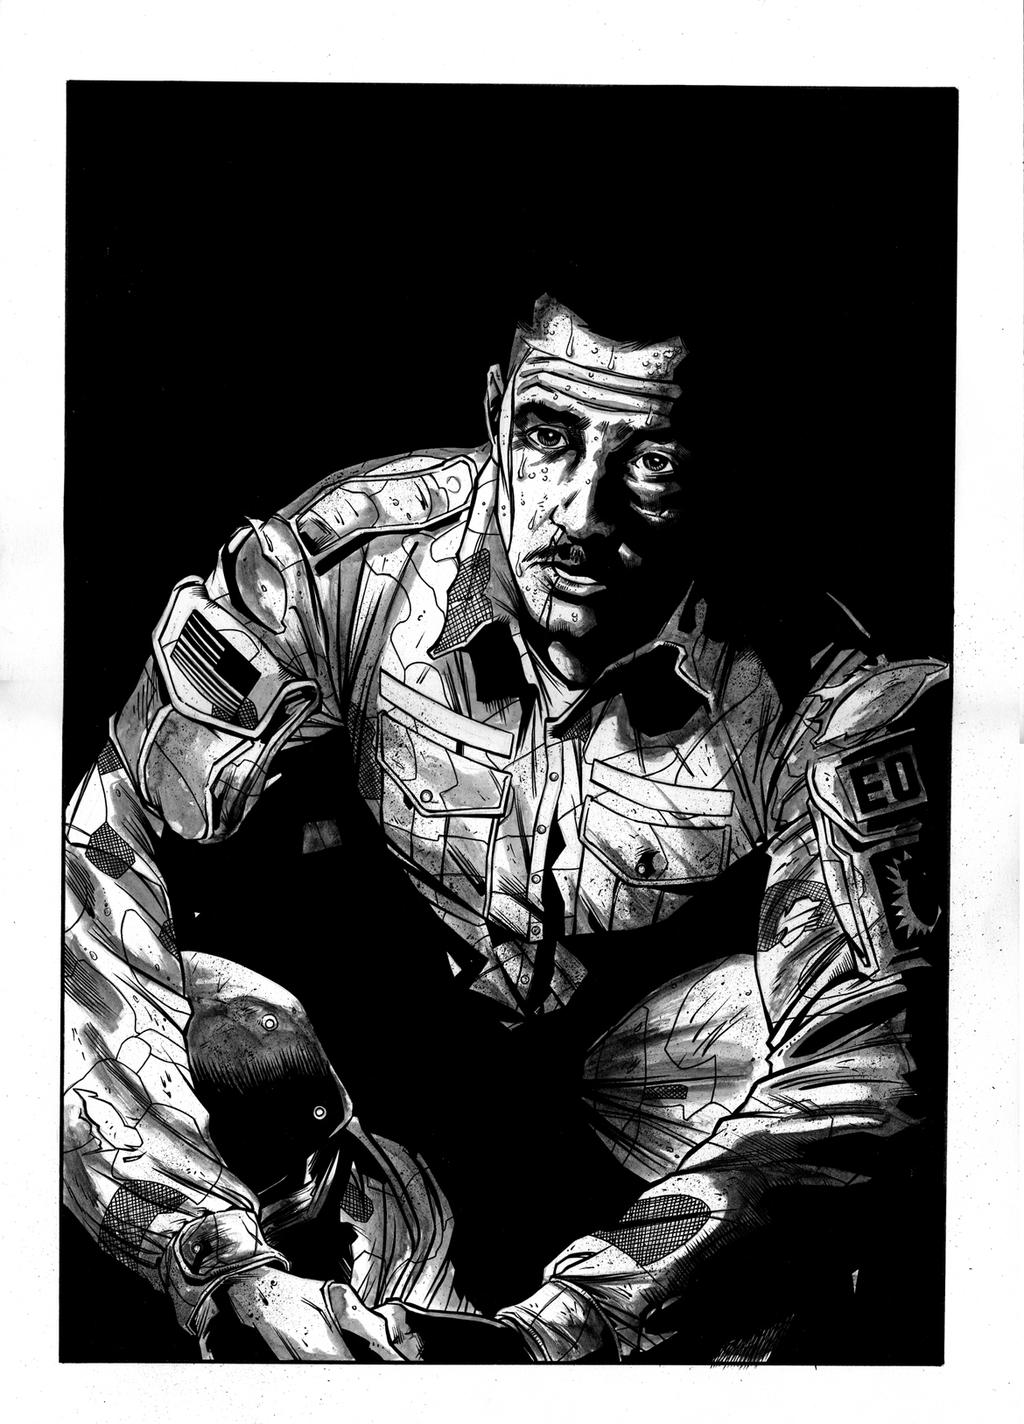 EOD Soldiers 01 - page - 21 ink